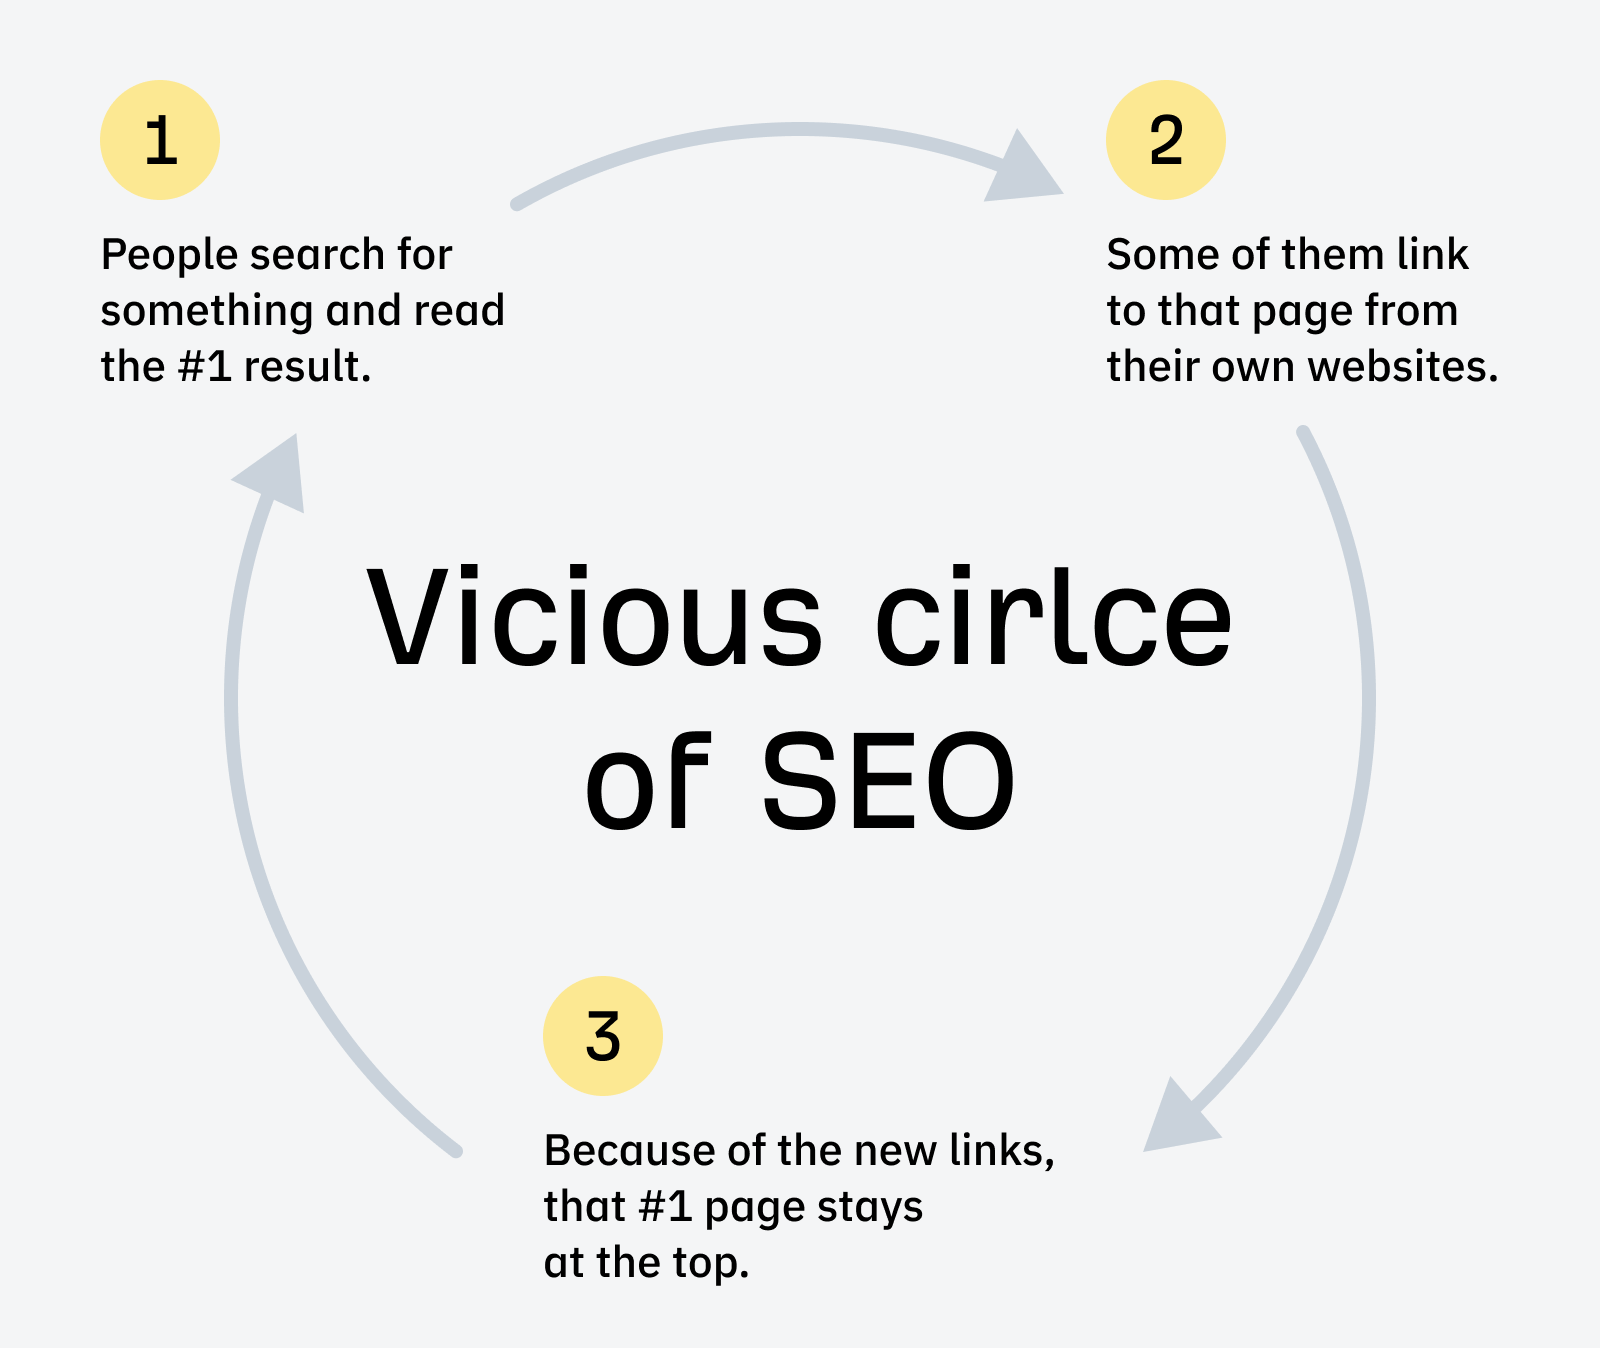 The vicious circle of SEO where you need links to rank, but top results get more links